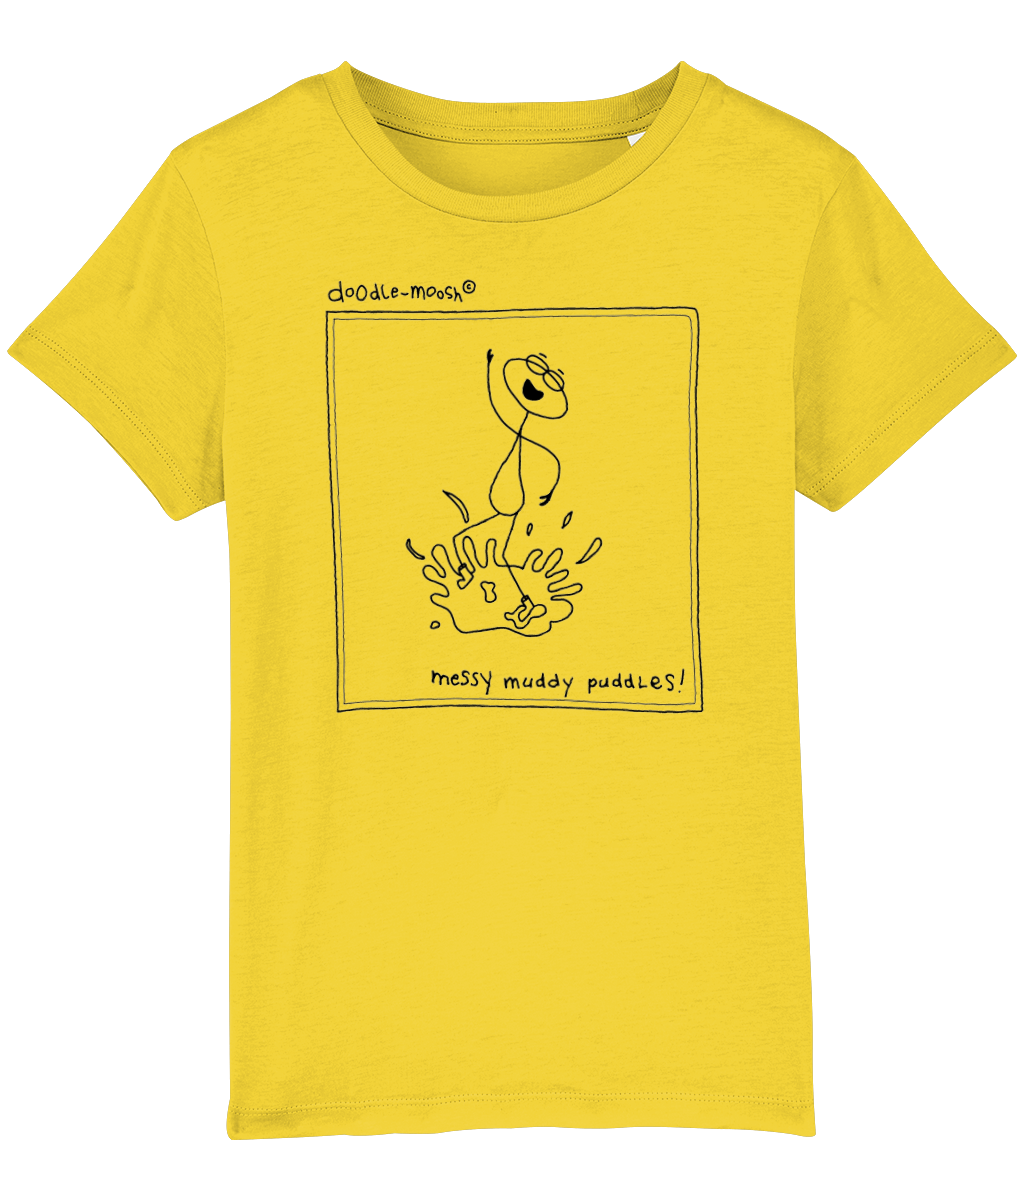 Messy muddy puddles t-shirt, yellow with black